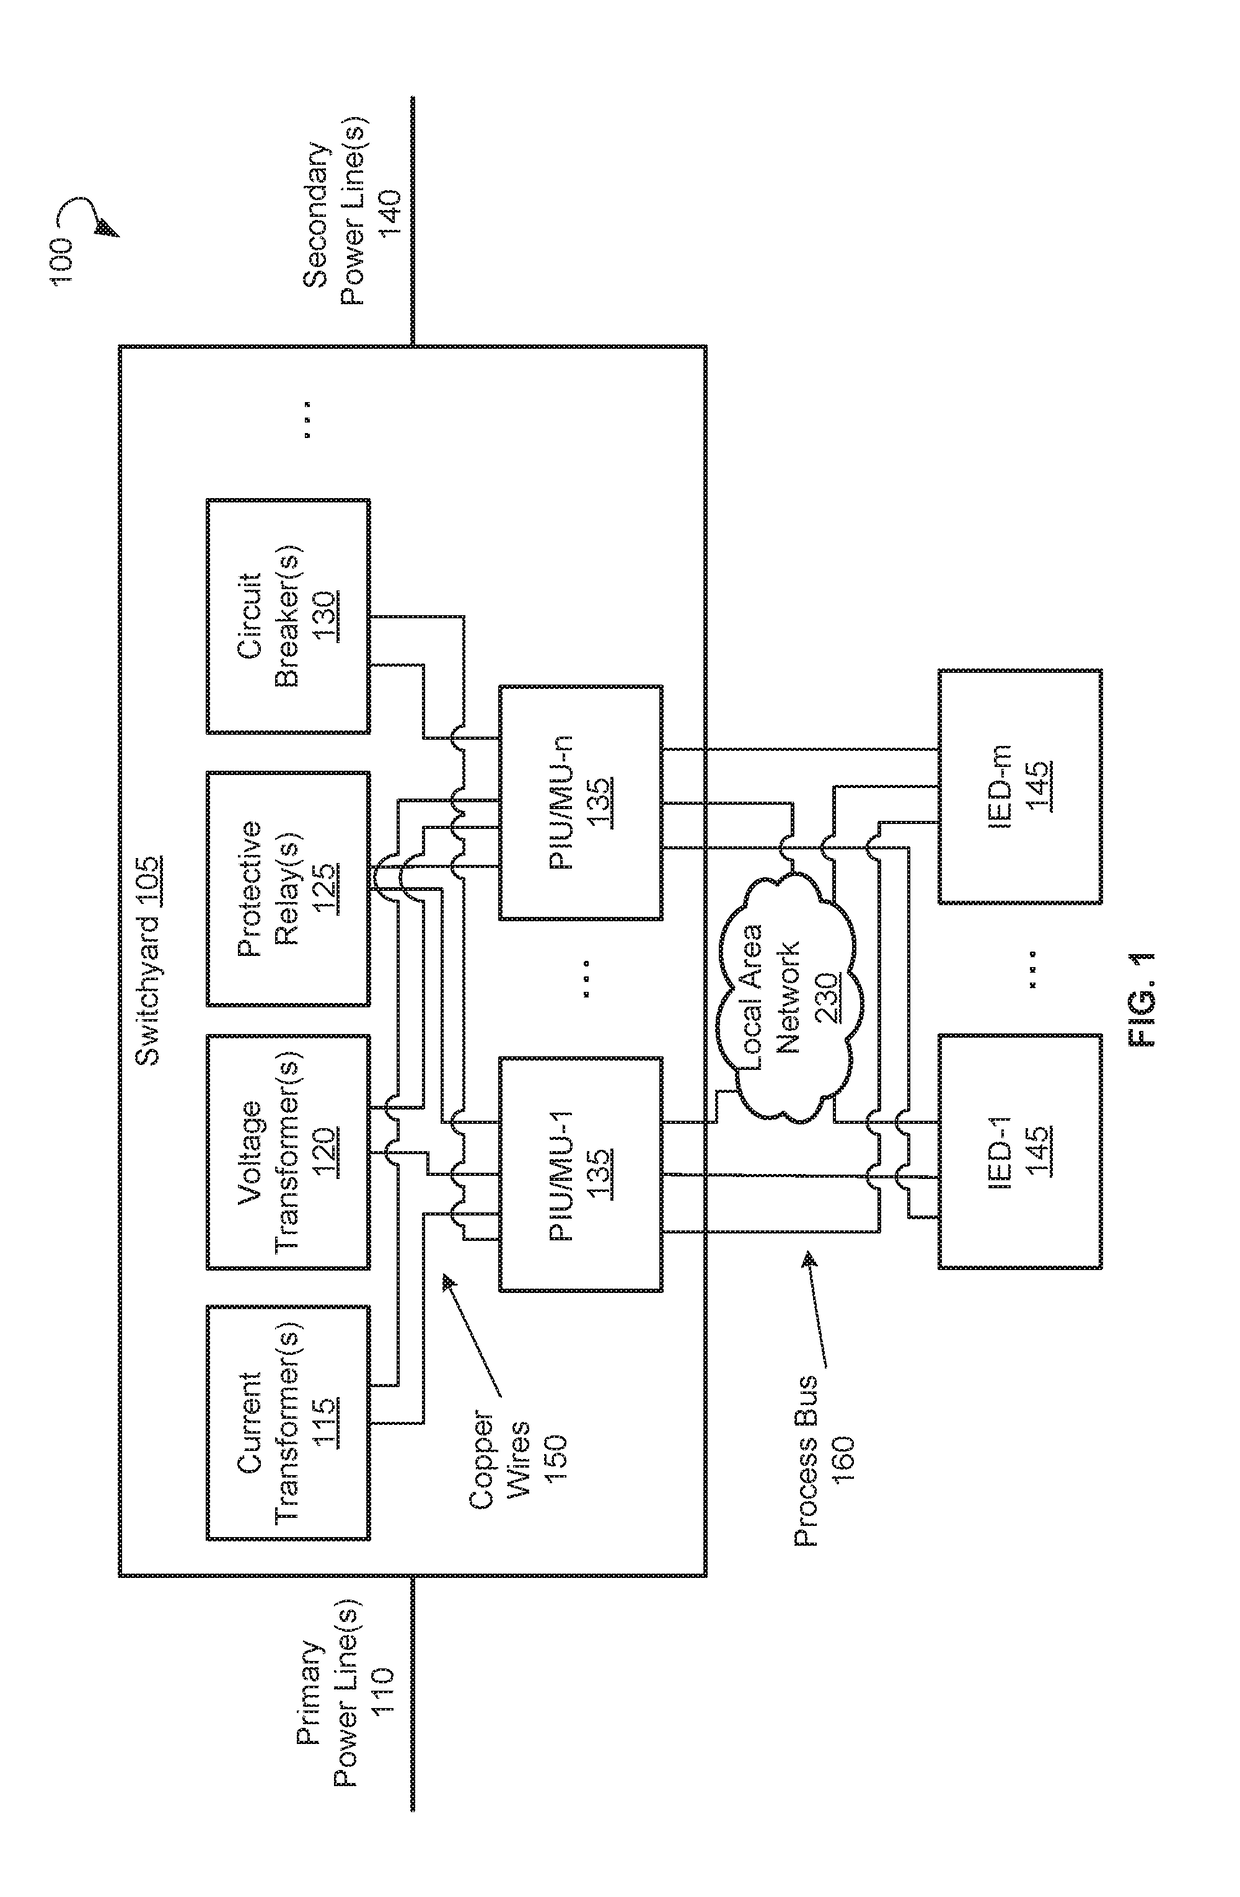 Systems and Methods for Configuration-less Process Bus with Architectural Redundancy in Digital Substations